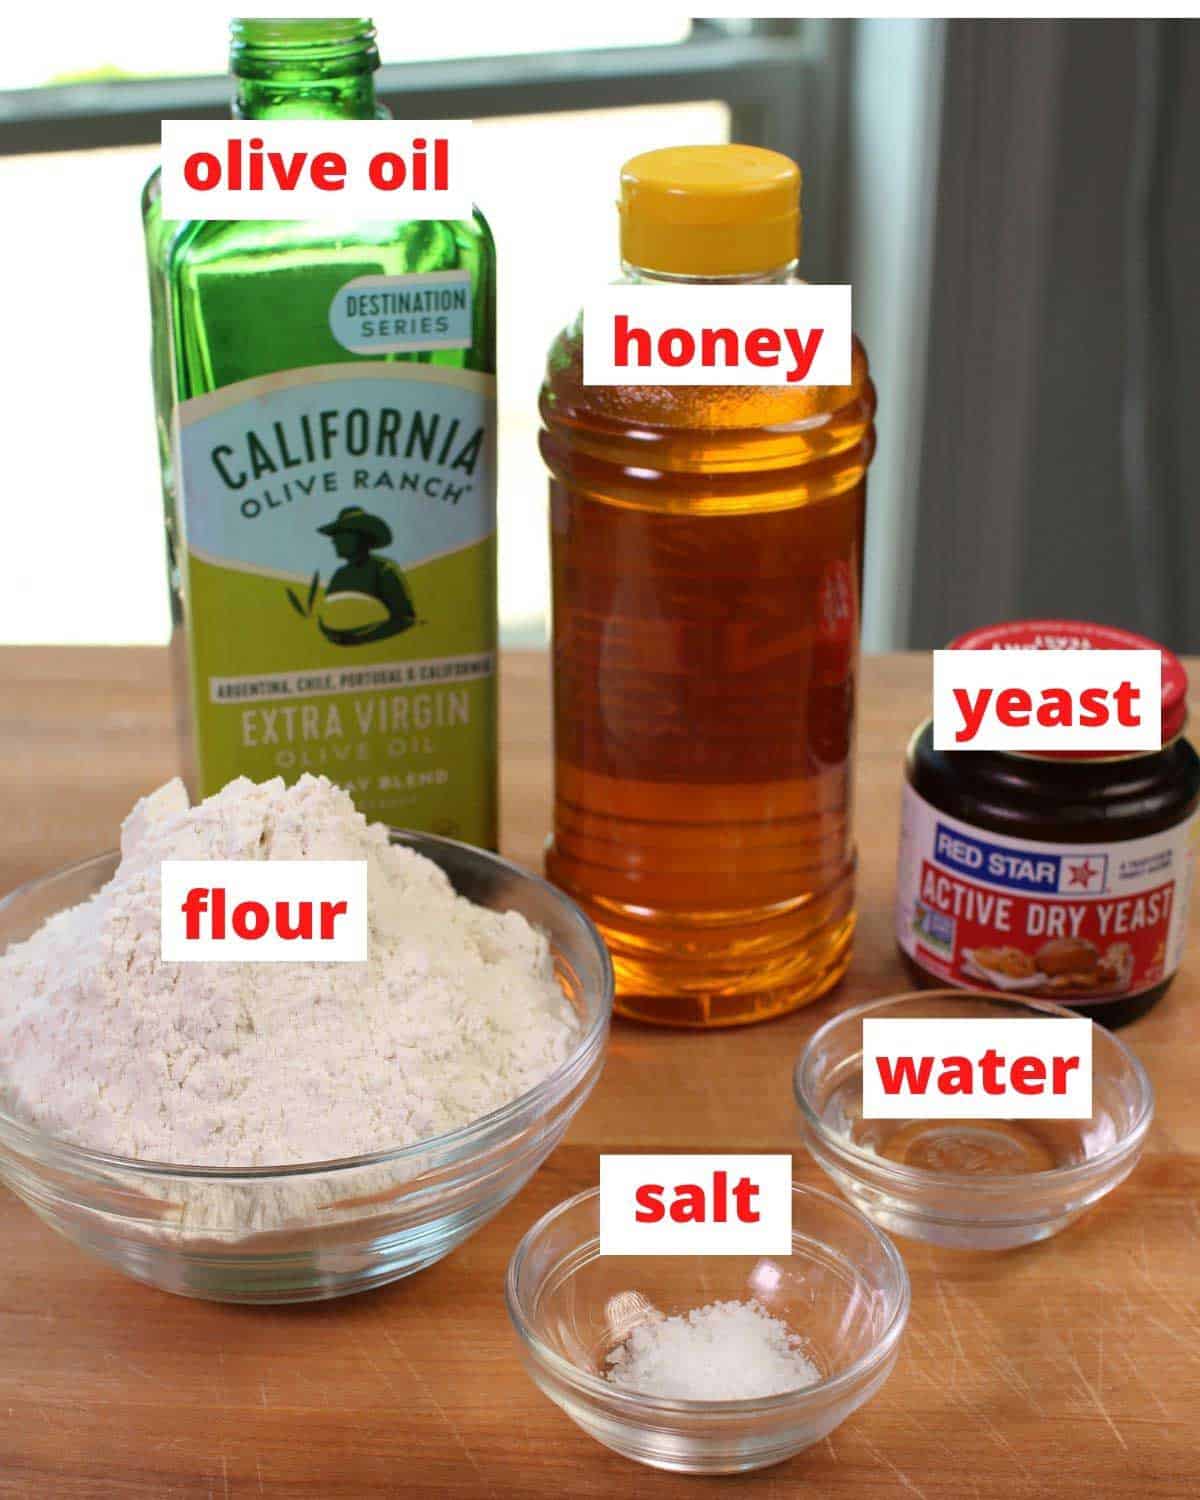 ingredients needed to make french bread including flour, yeast, and water on a wooden table.